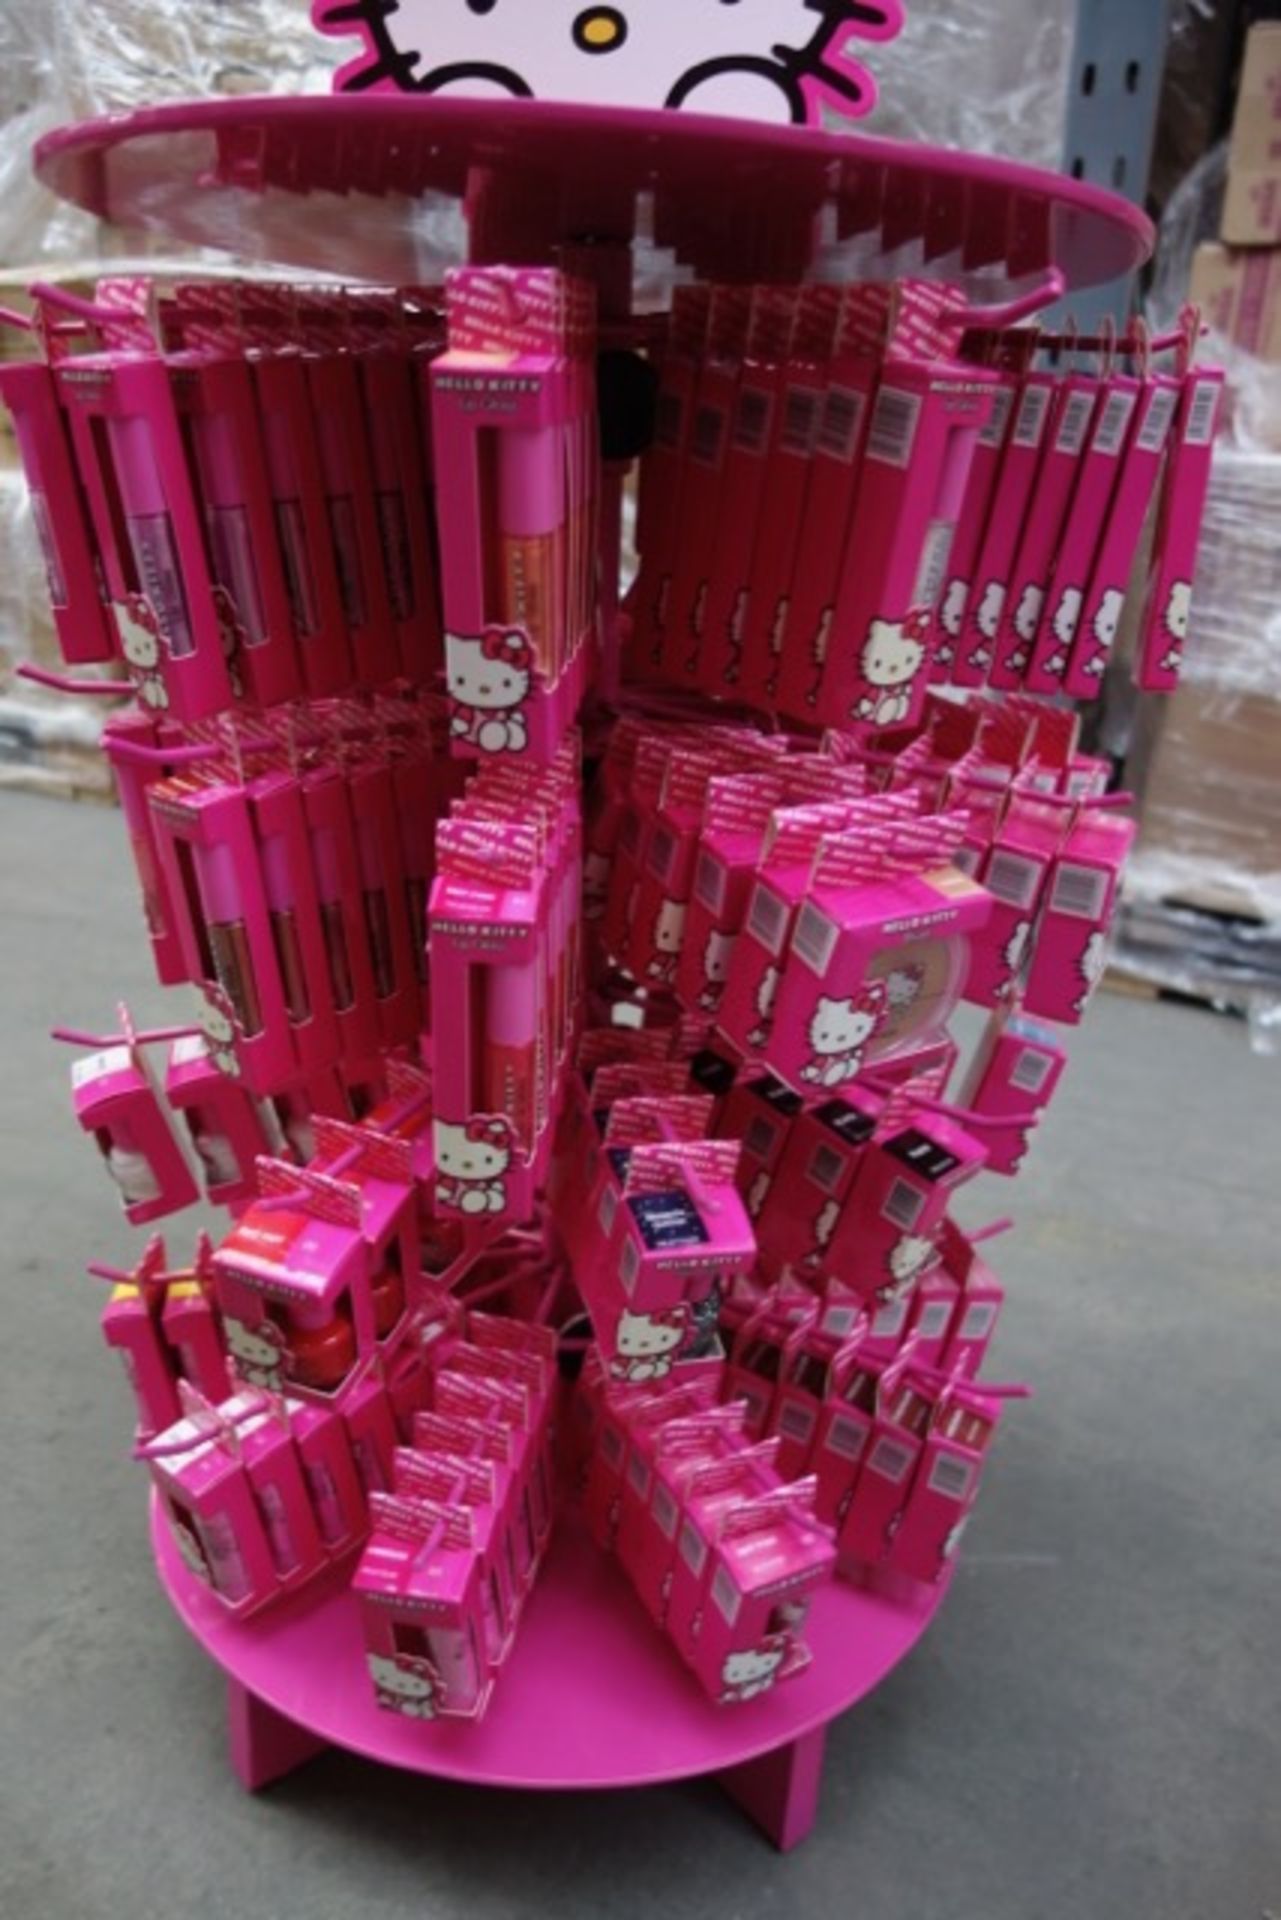 Display Stand Containing Approx. 240 Pieces of Hello Kitty Cosmetics - each with a RRP of £3.50 - Image 9 of 9